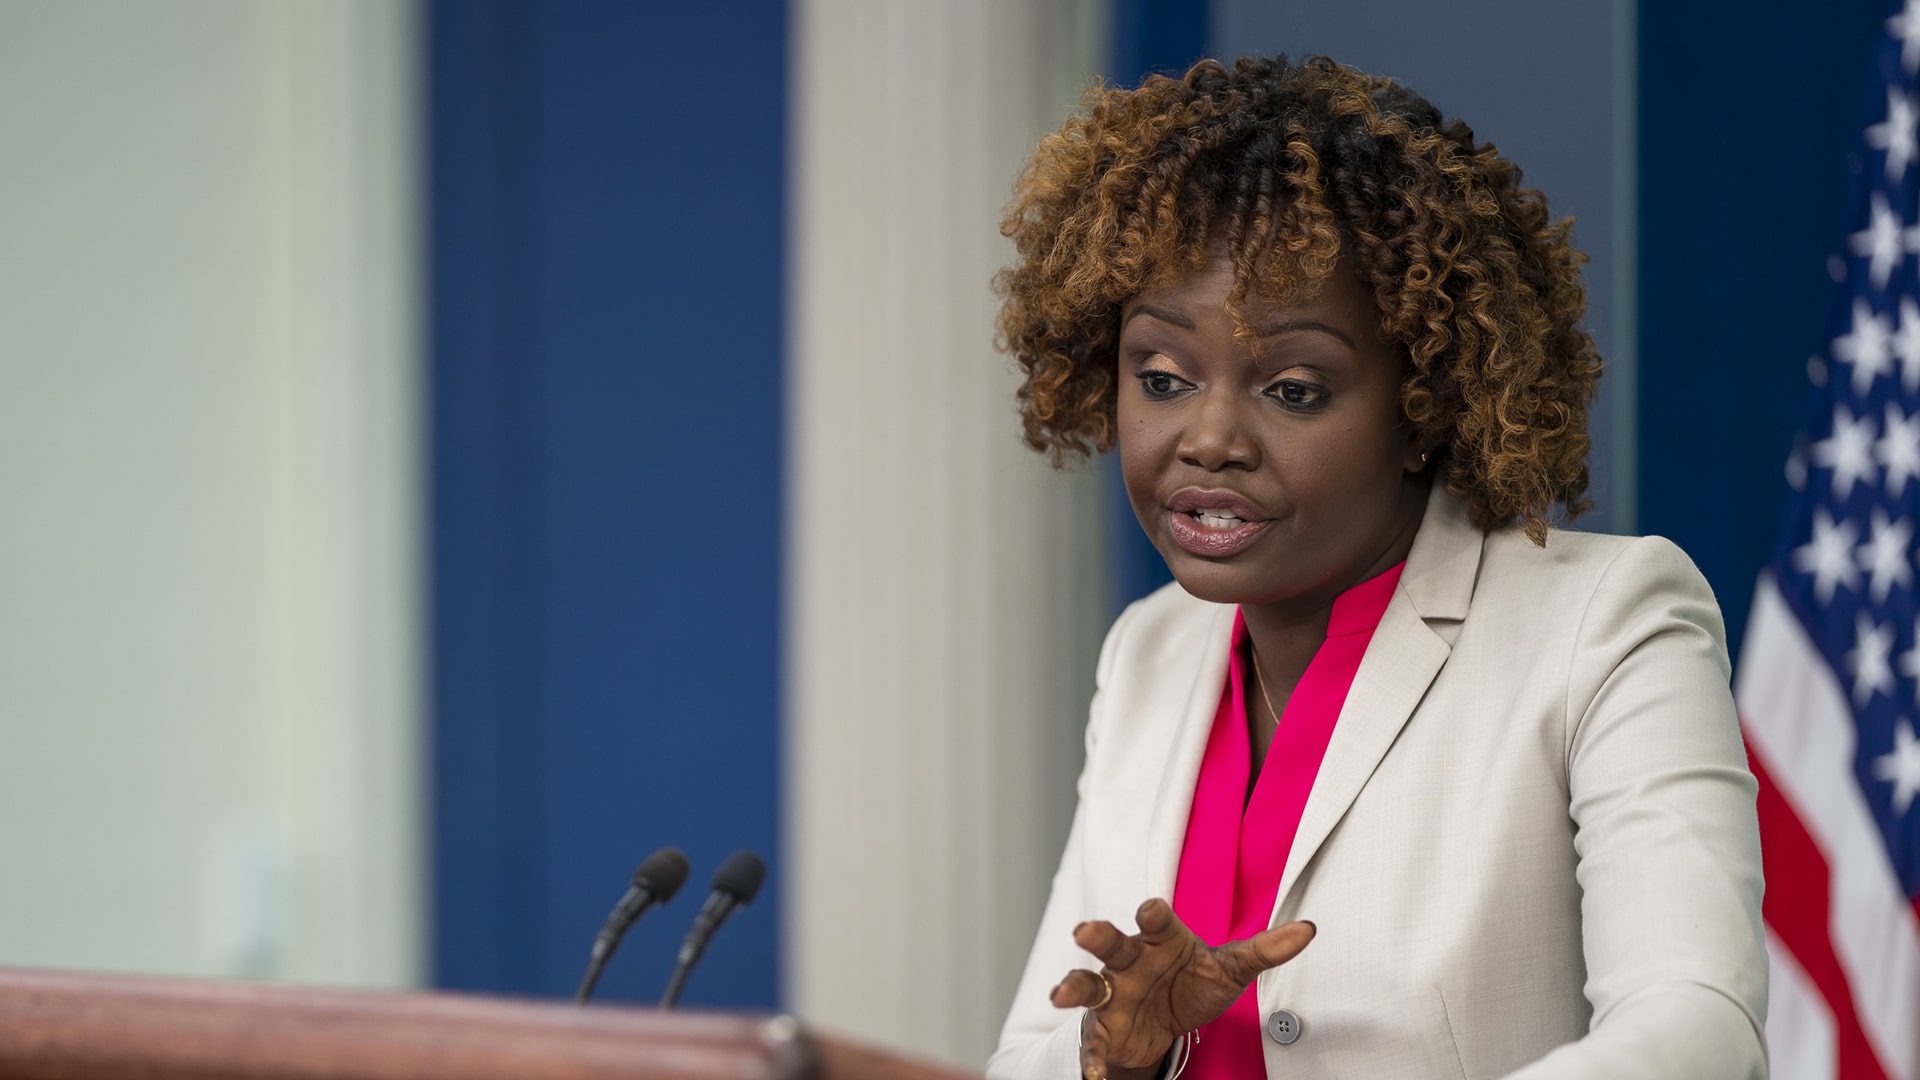 Press Secretary Karine Jean-Pierre holds a press briefing, Thursday, February 2, 2023, in the James S. Brady Press Briefing Room at the White House. (Official White House Photo by Hannah Foslien).